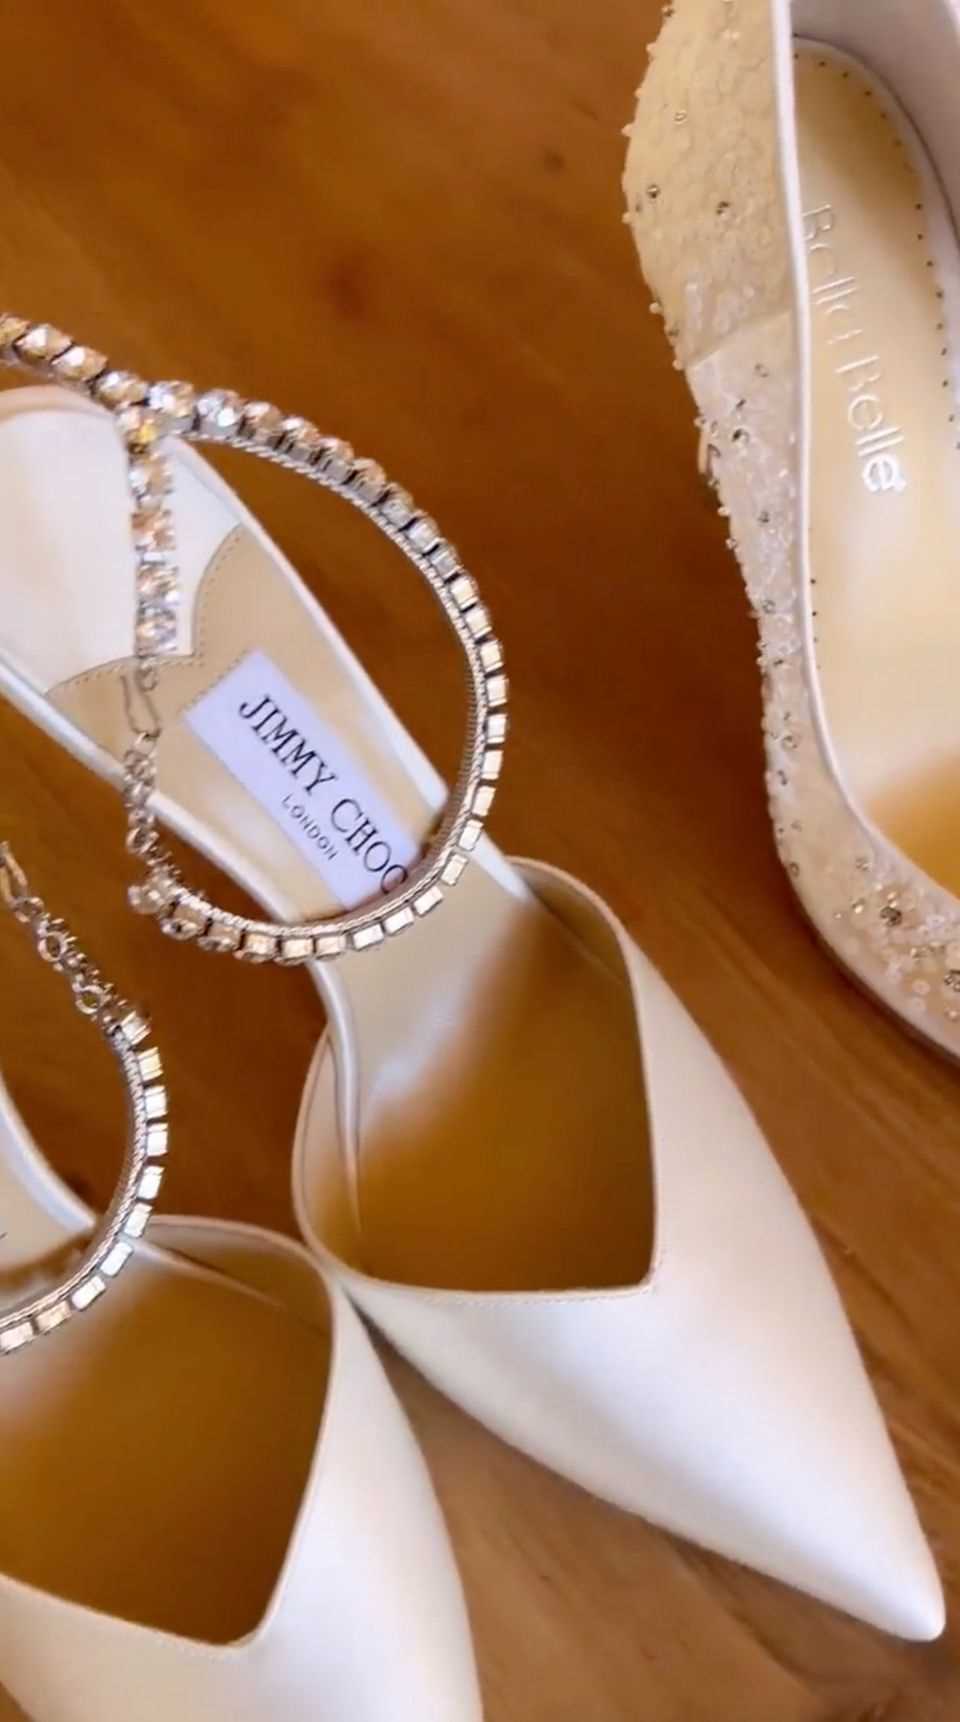 The bride has two pairs of shoes ready for her big day.